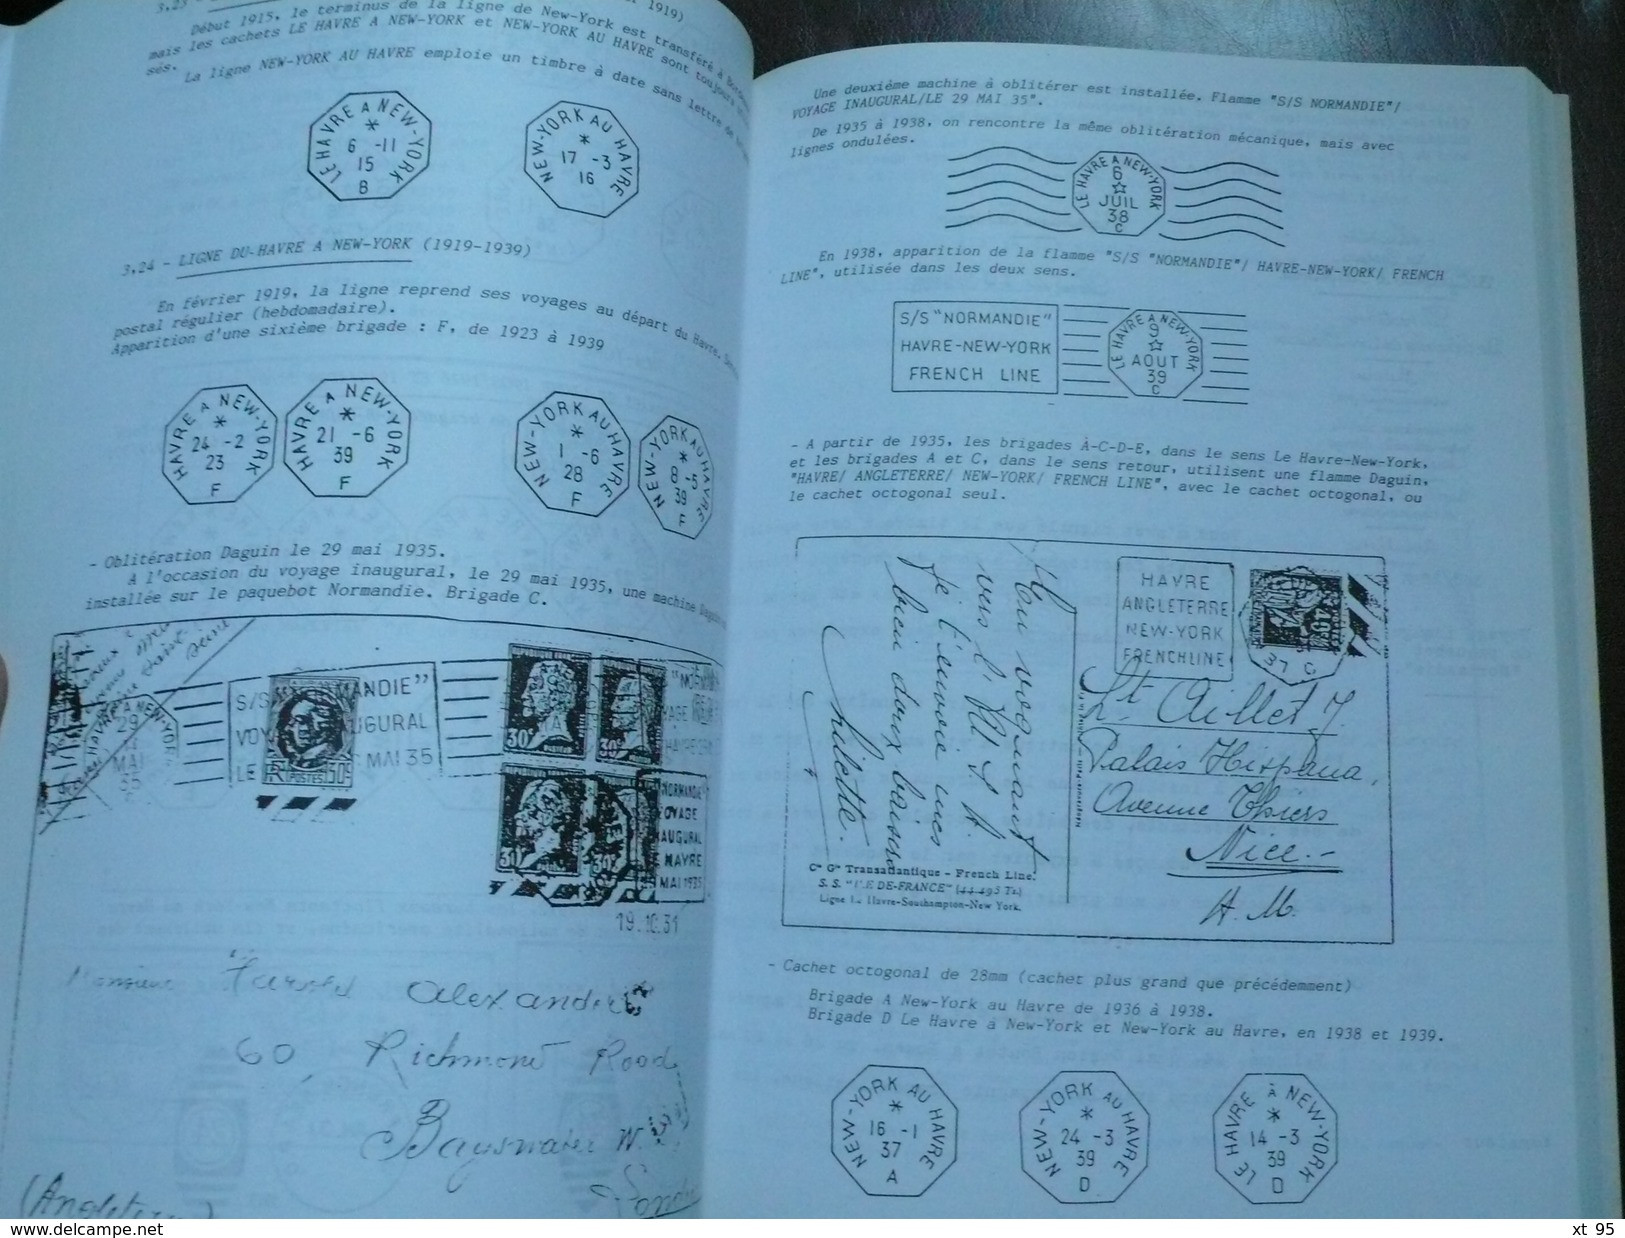 Histoire Postale Seine Inferieure Seine Maritime - 394 Pages - Philately And Postal History